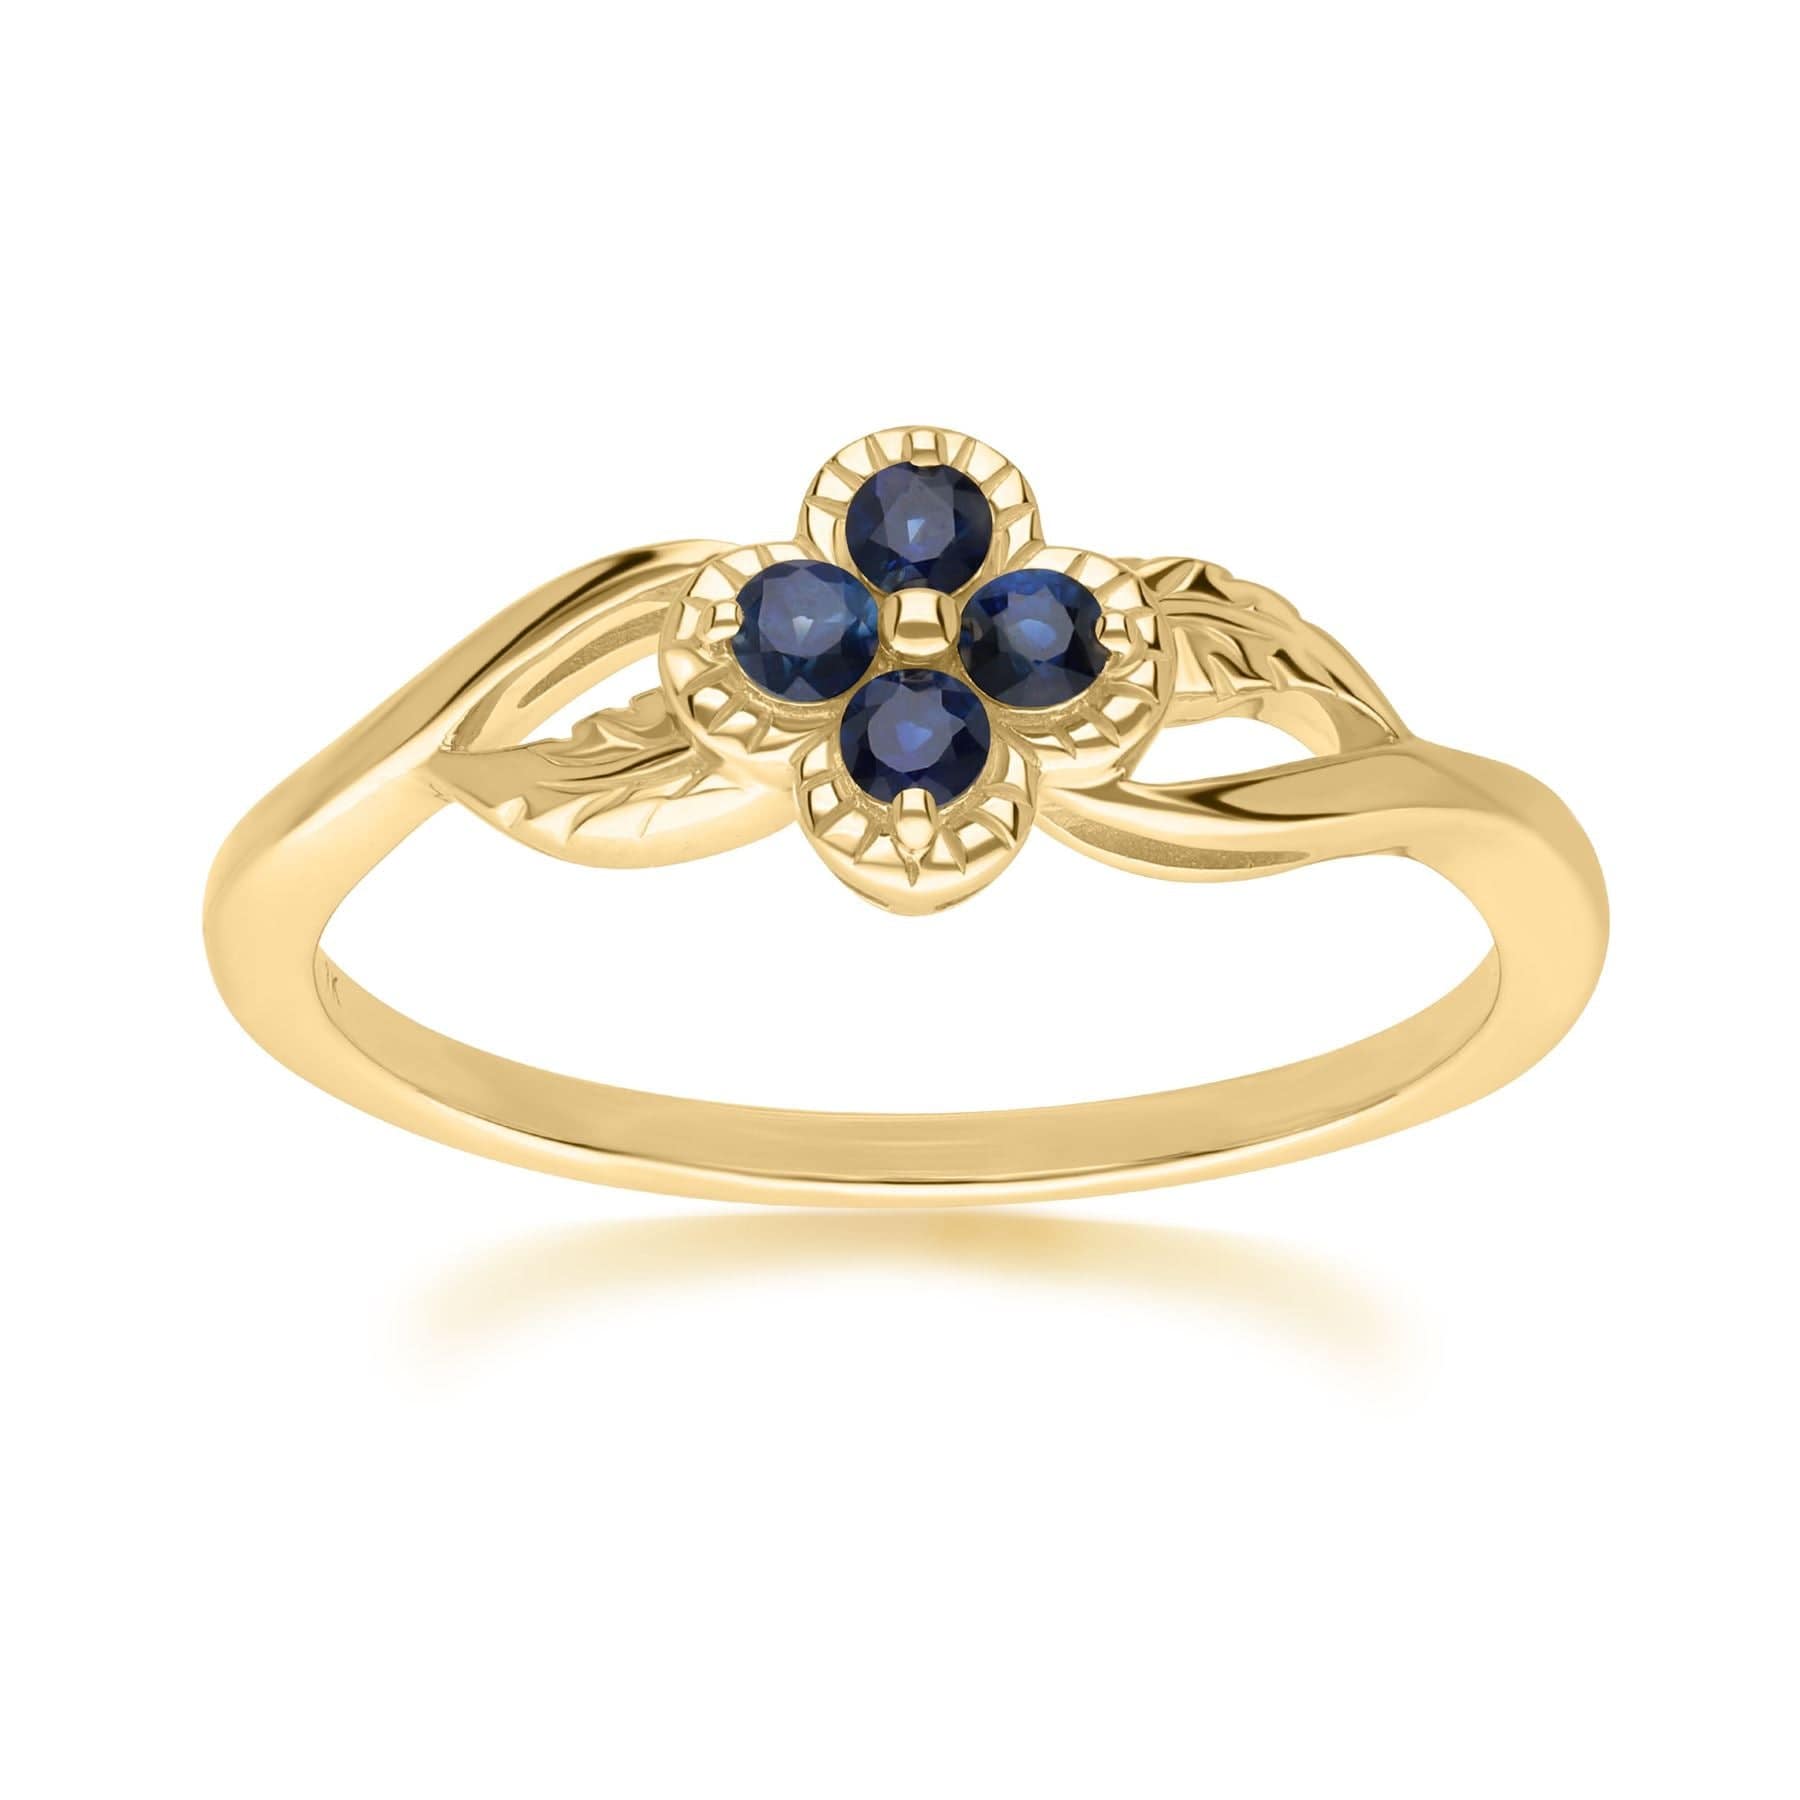 Floral Round Sapphire Ring in 9ct Yellow Gold - Gemondo